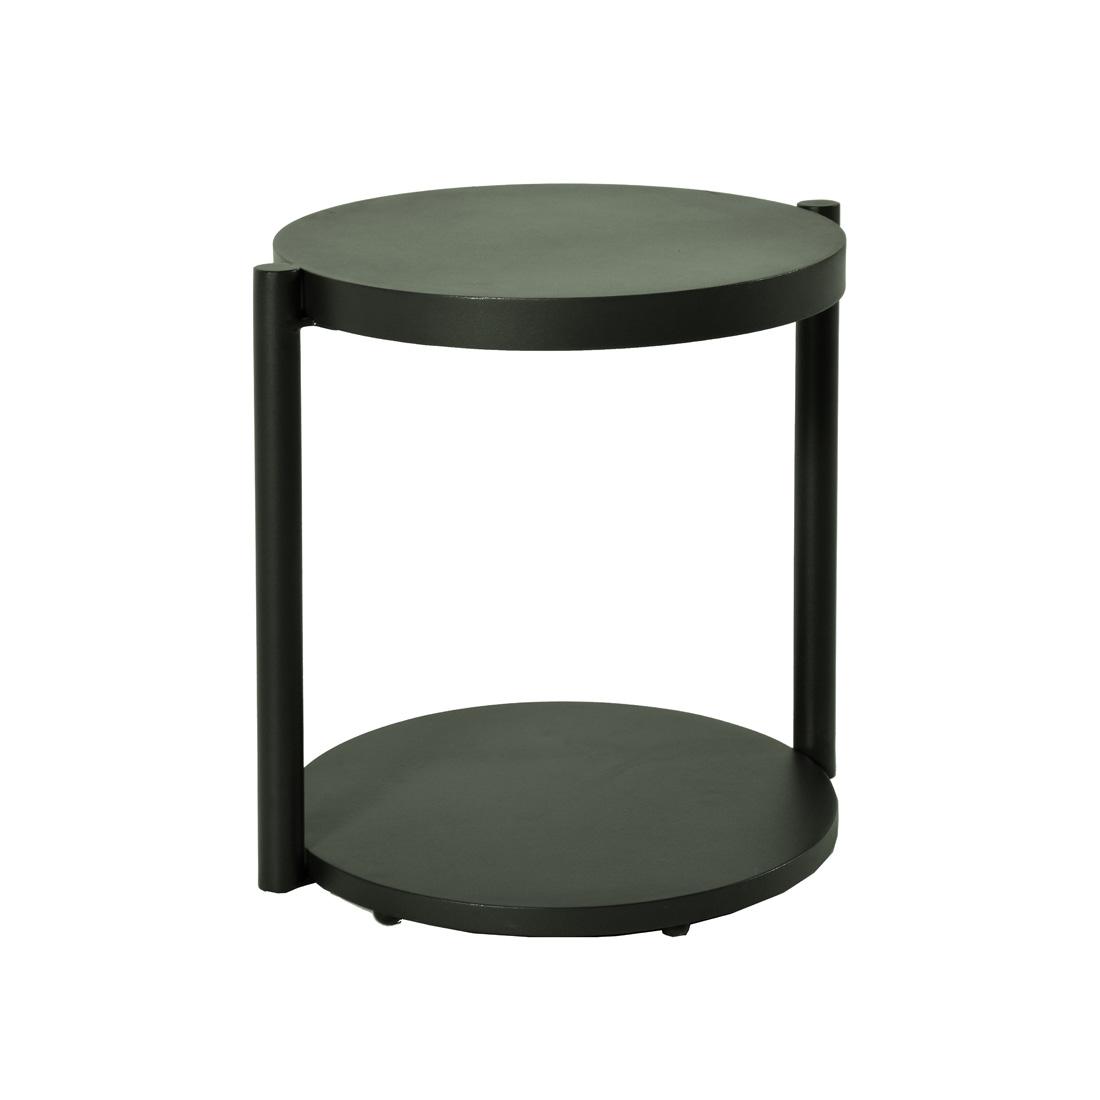 Pier Pipe Round Side Table image 1